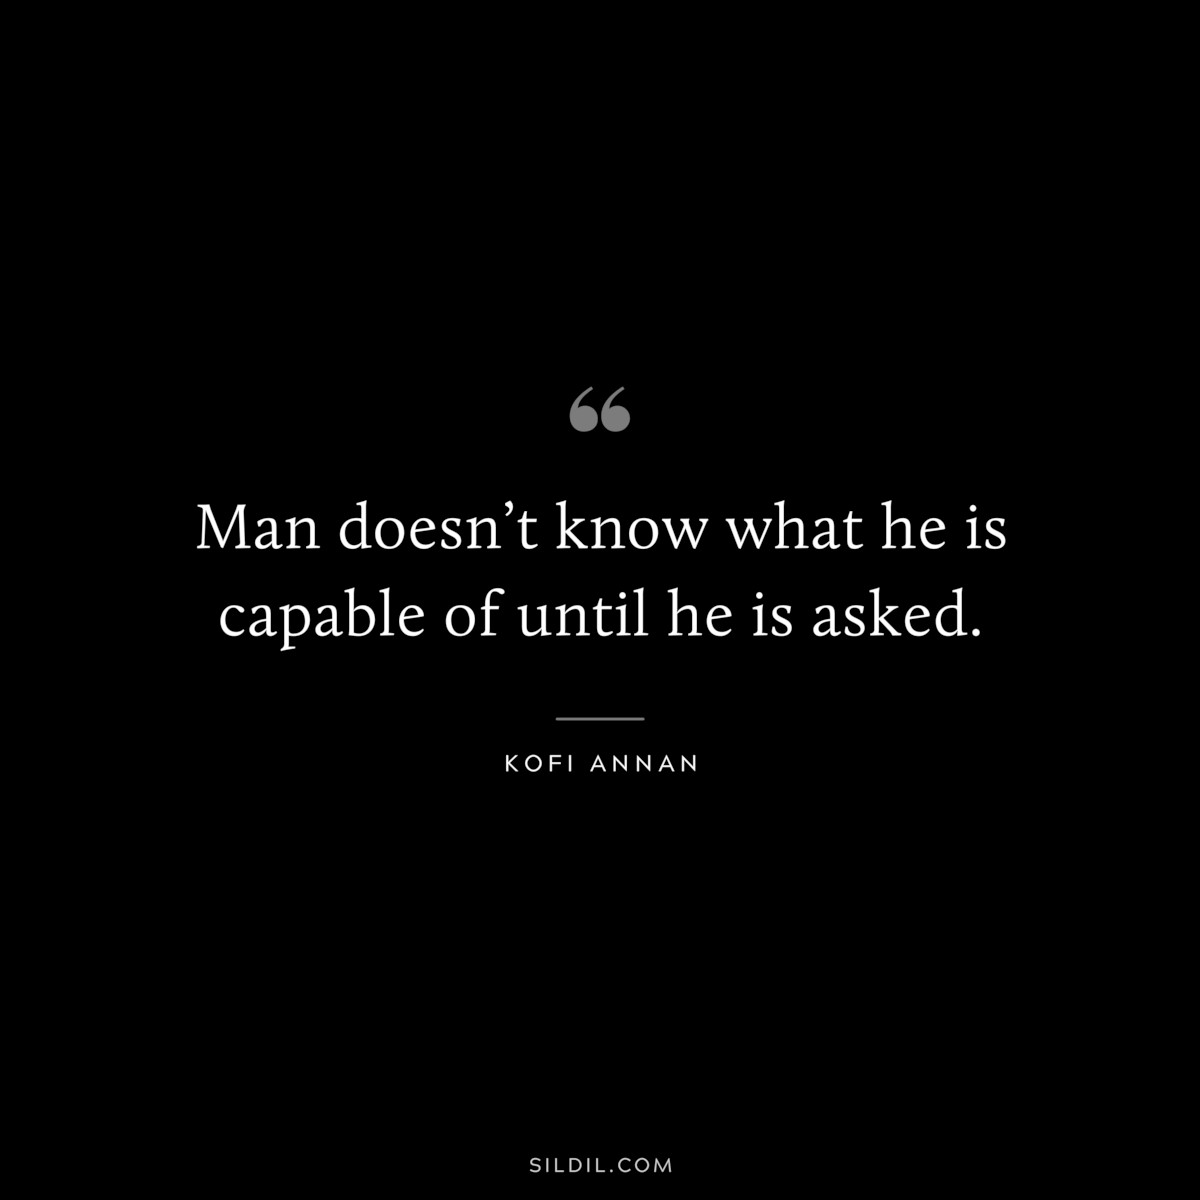 Man doesn’t know what he is capable of until he is asked. ― Kofi Annan